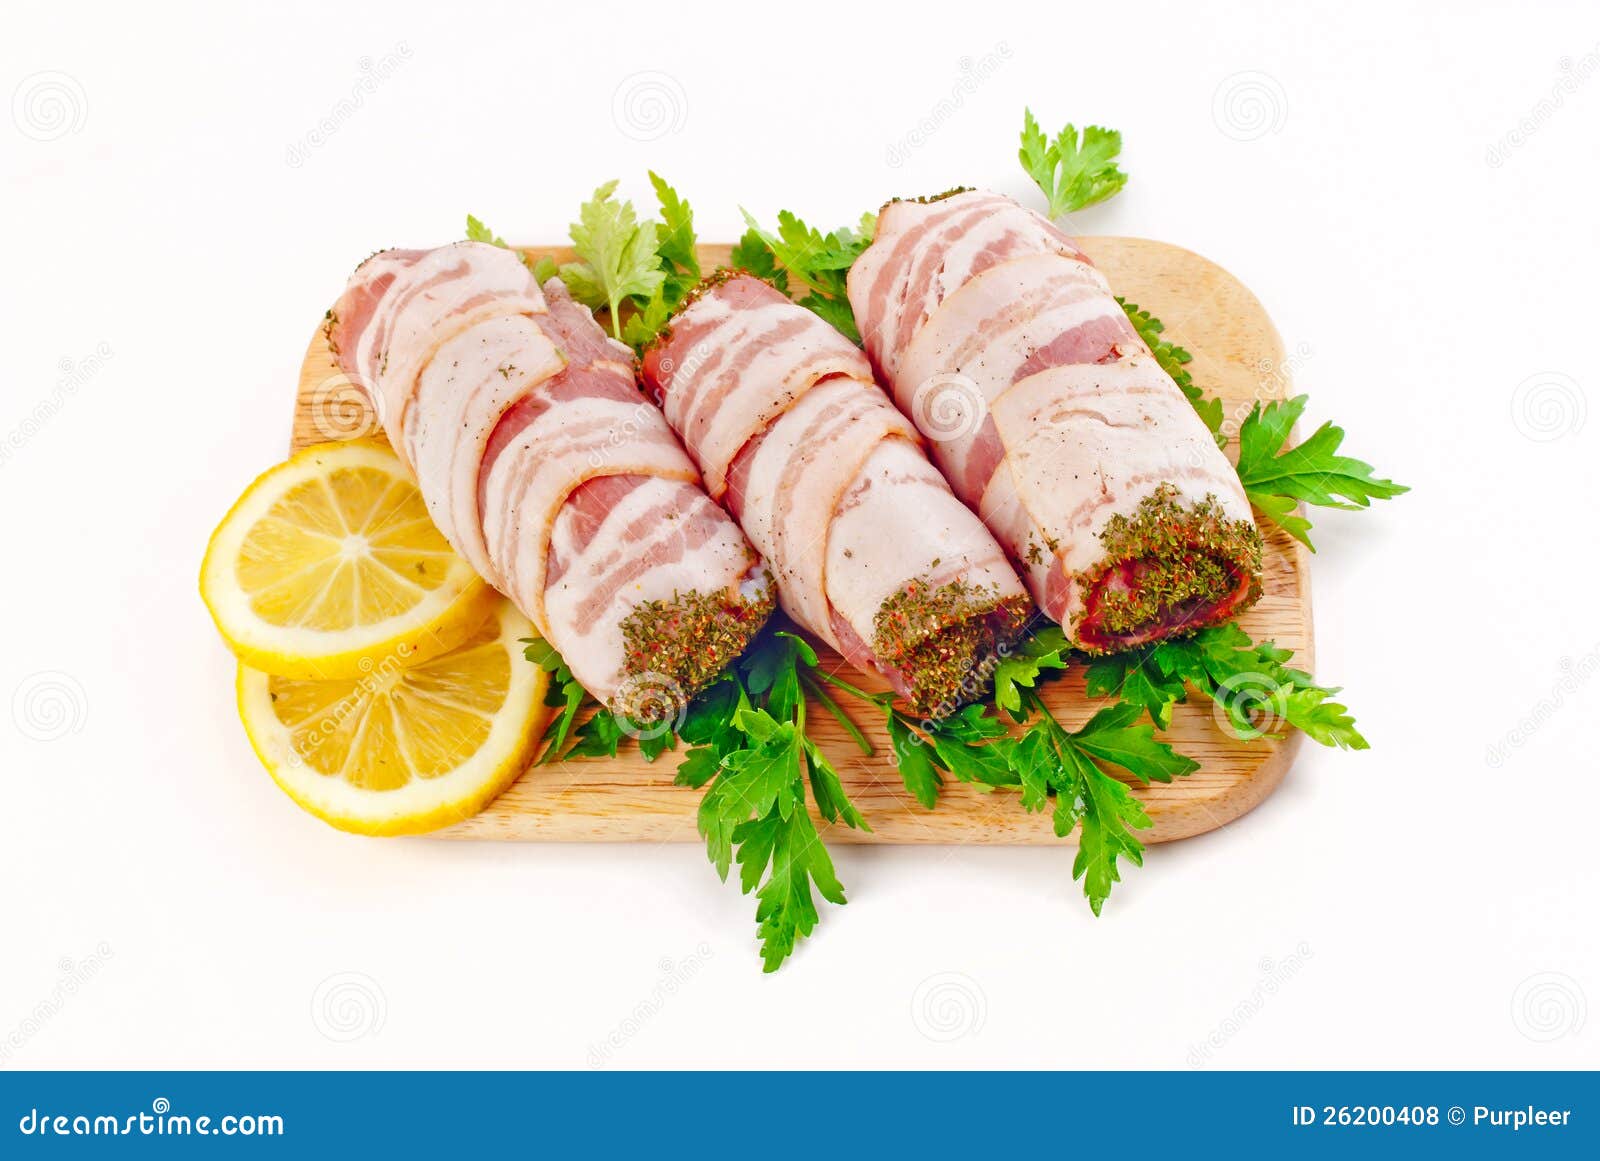 Sausage in beacon. Sausages in beacon with fresh parsley &amp; lemon on the woody board isolated